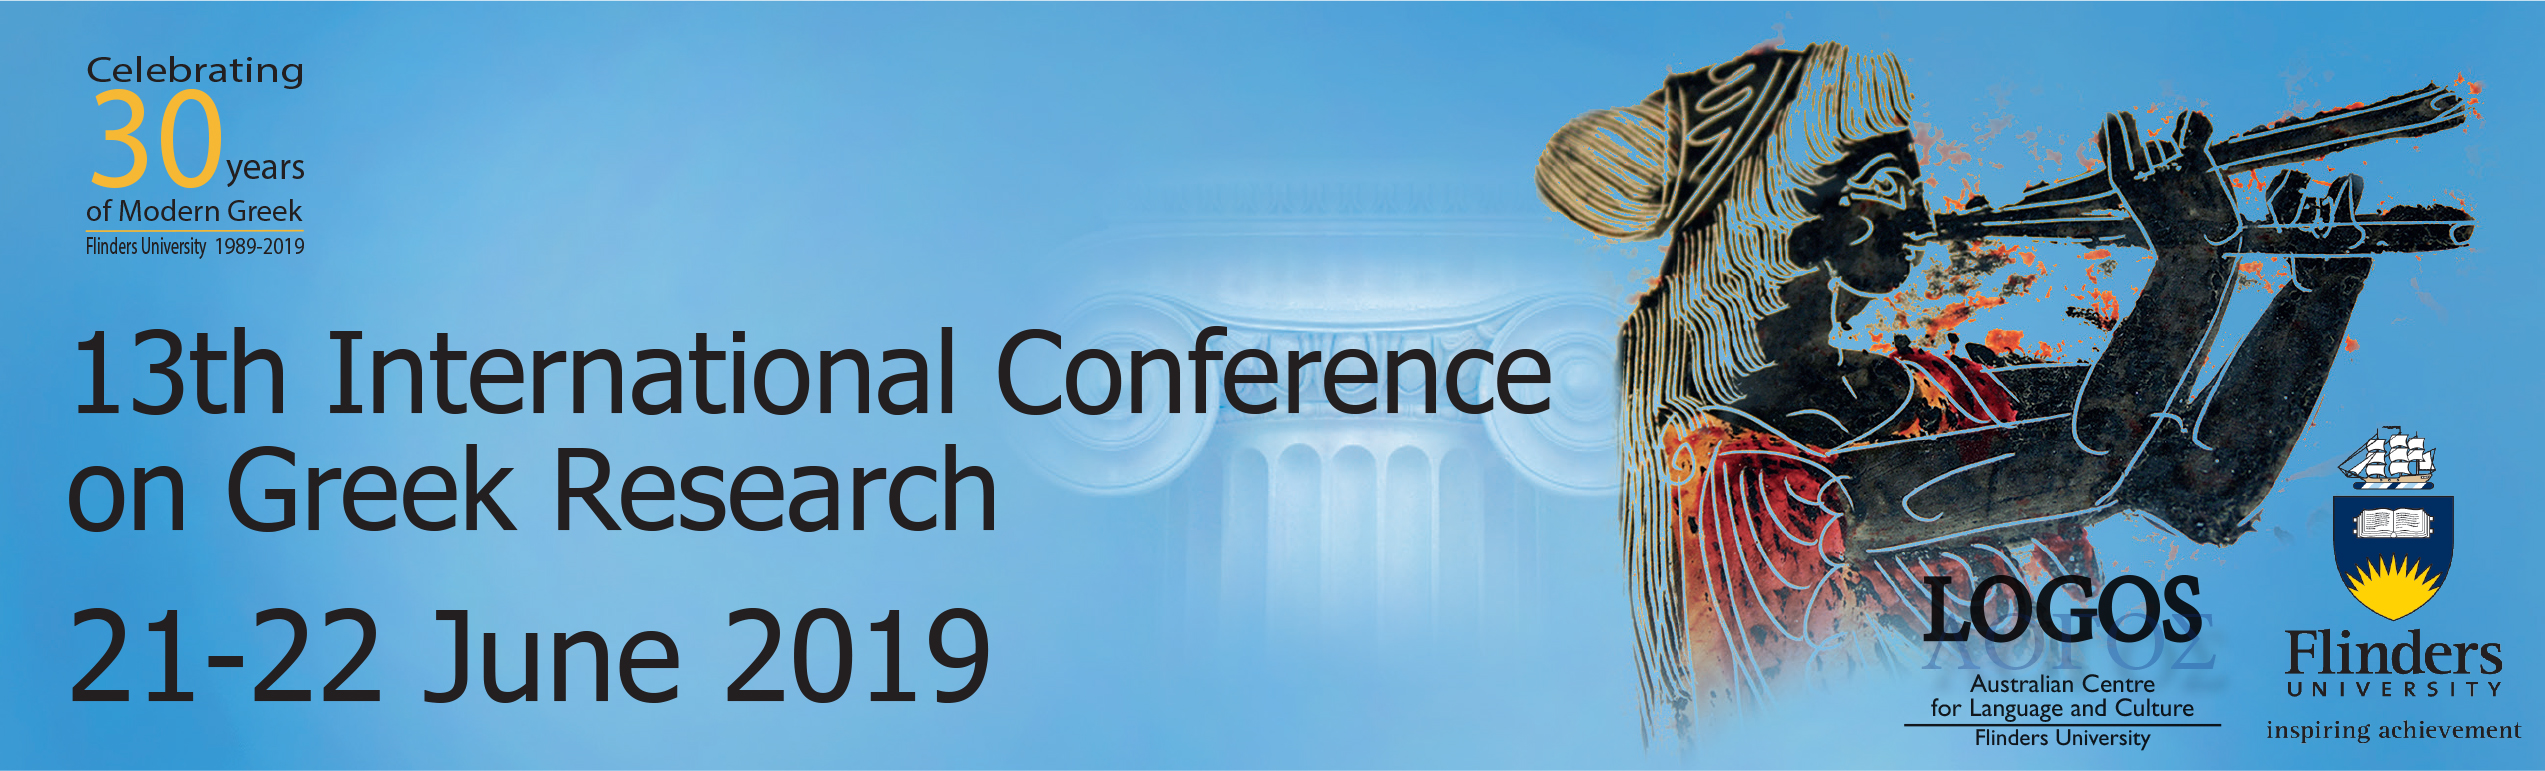 13th International Conference on Greek Research